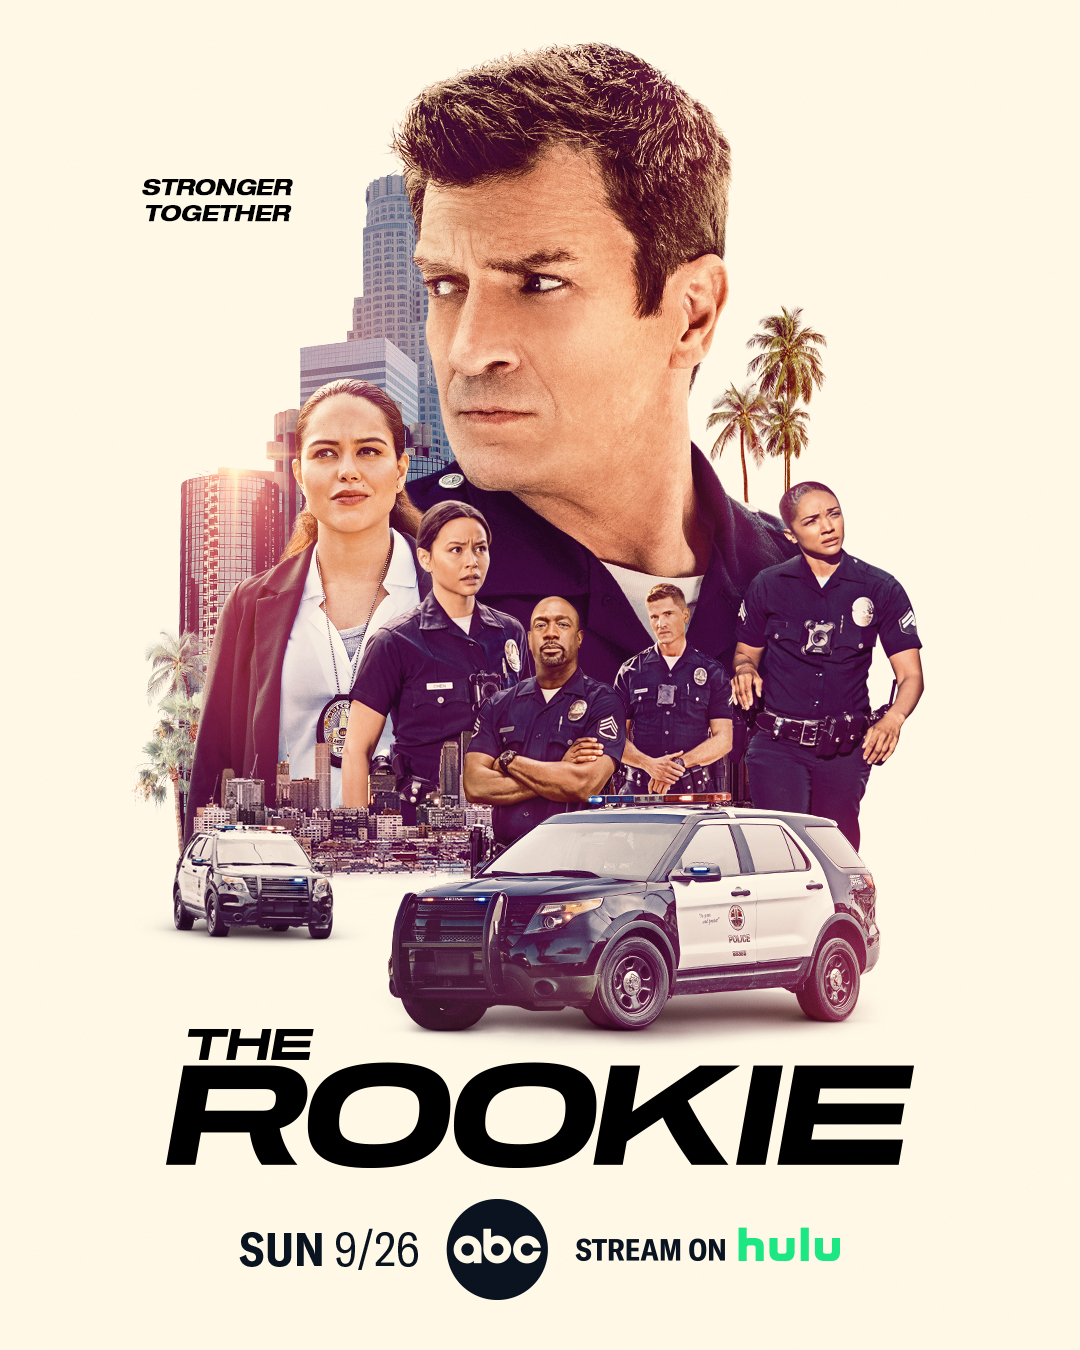 The Rookie season 4 episode 09 Release Date Cast Plot and Where To Watch Online